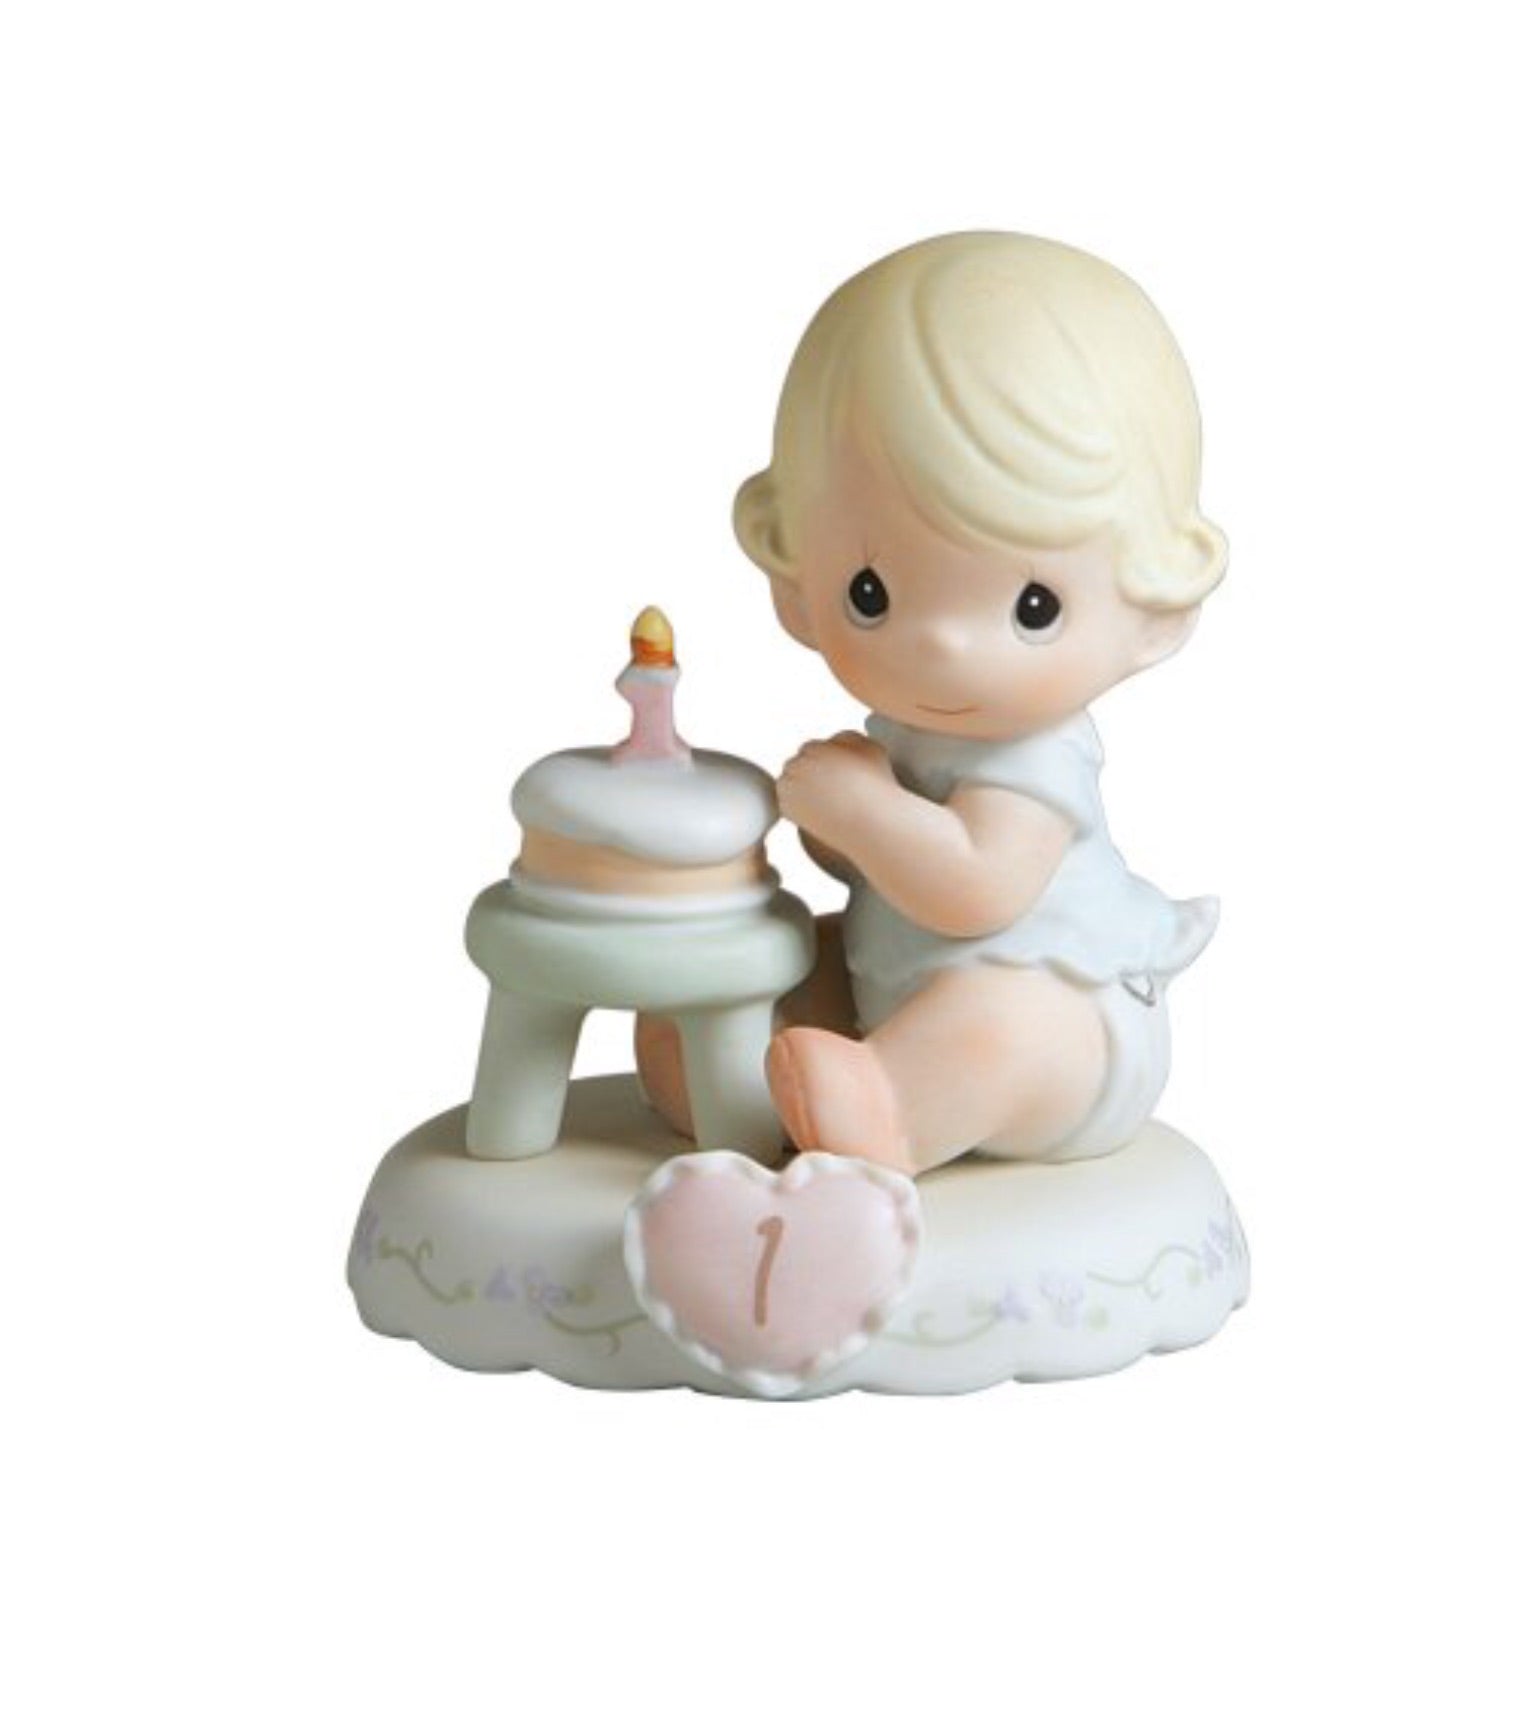 Growing in Grace Age 1 - Precious Moment Figurine